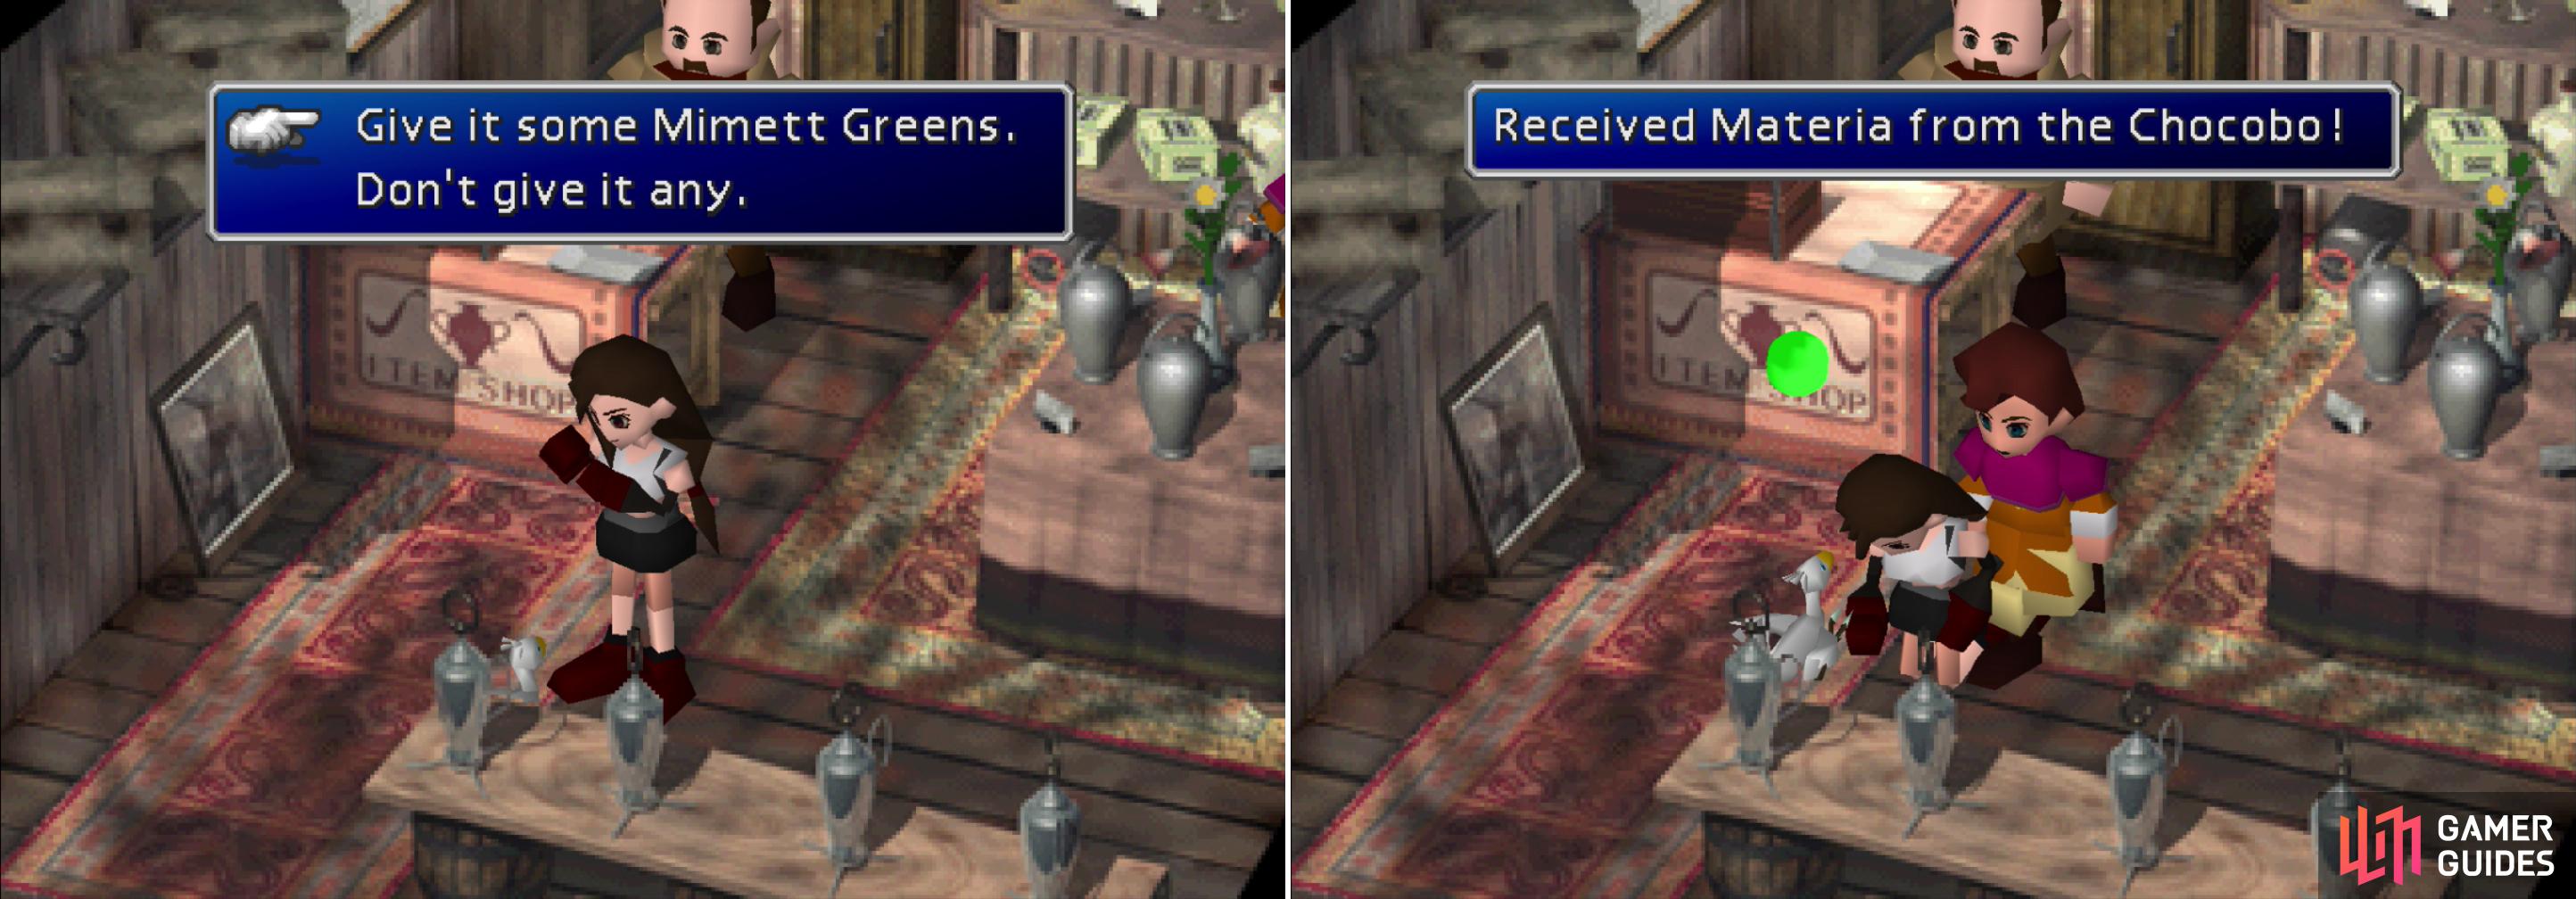 Give the greedy Chocobo some Mimett Greens and scratch behind its ear (left). For pleasing the Chocobo itll reward you with Contain Materia (right).